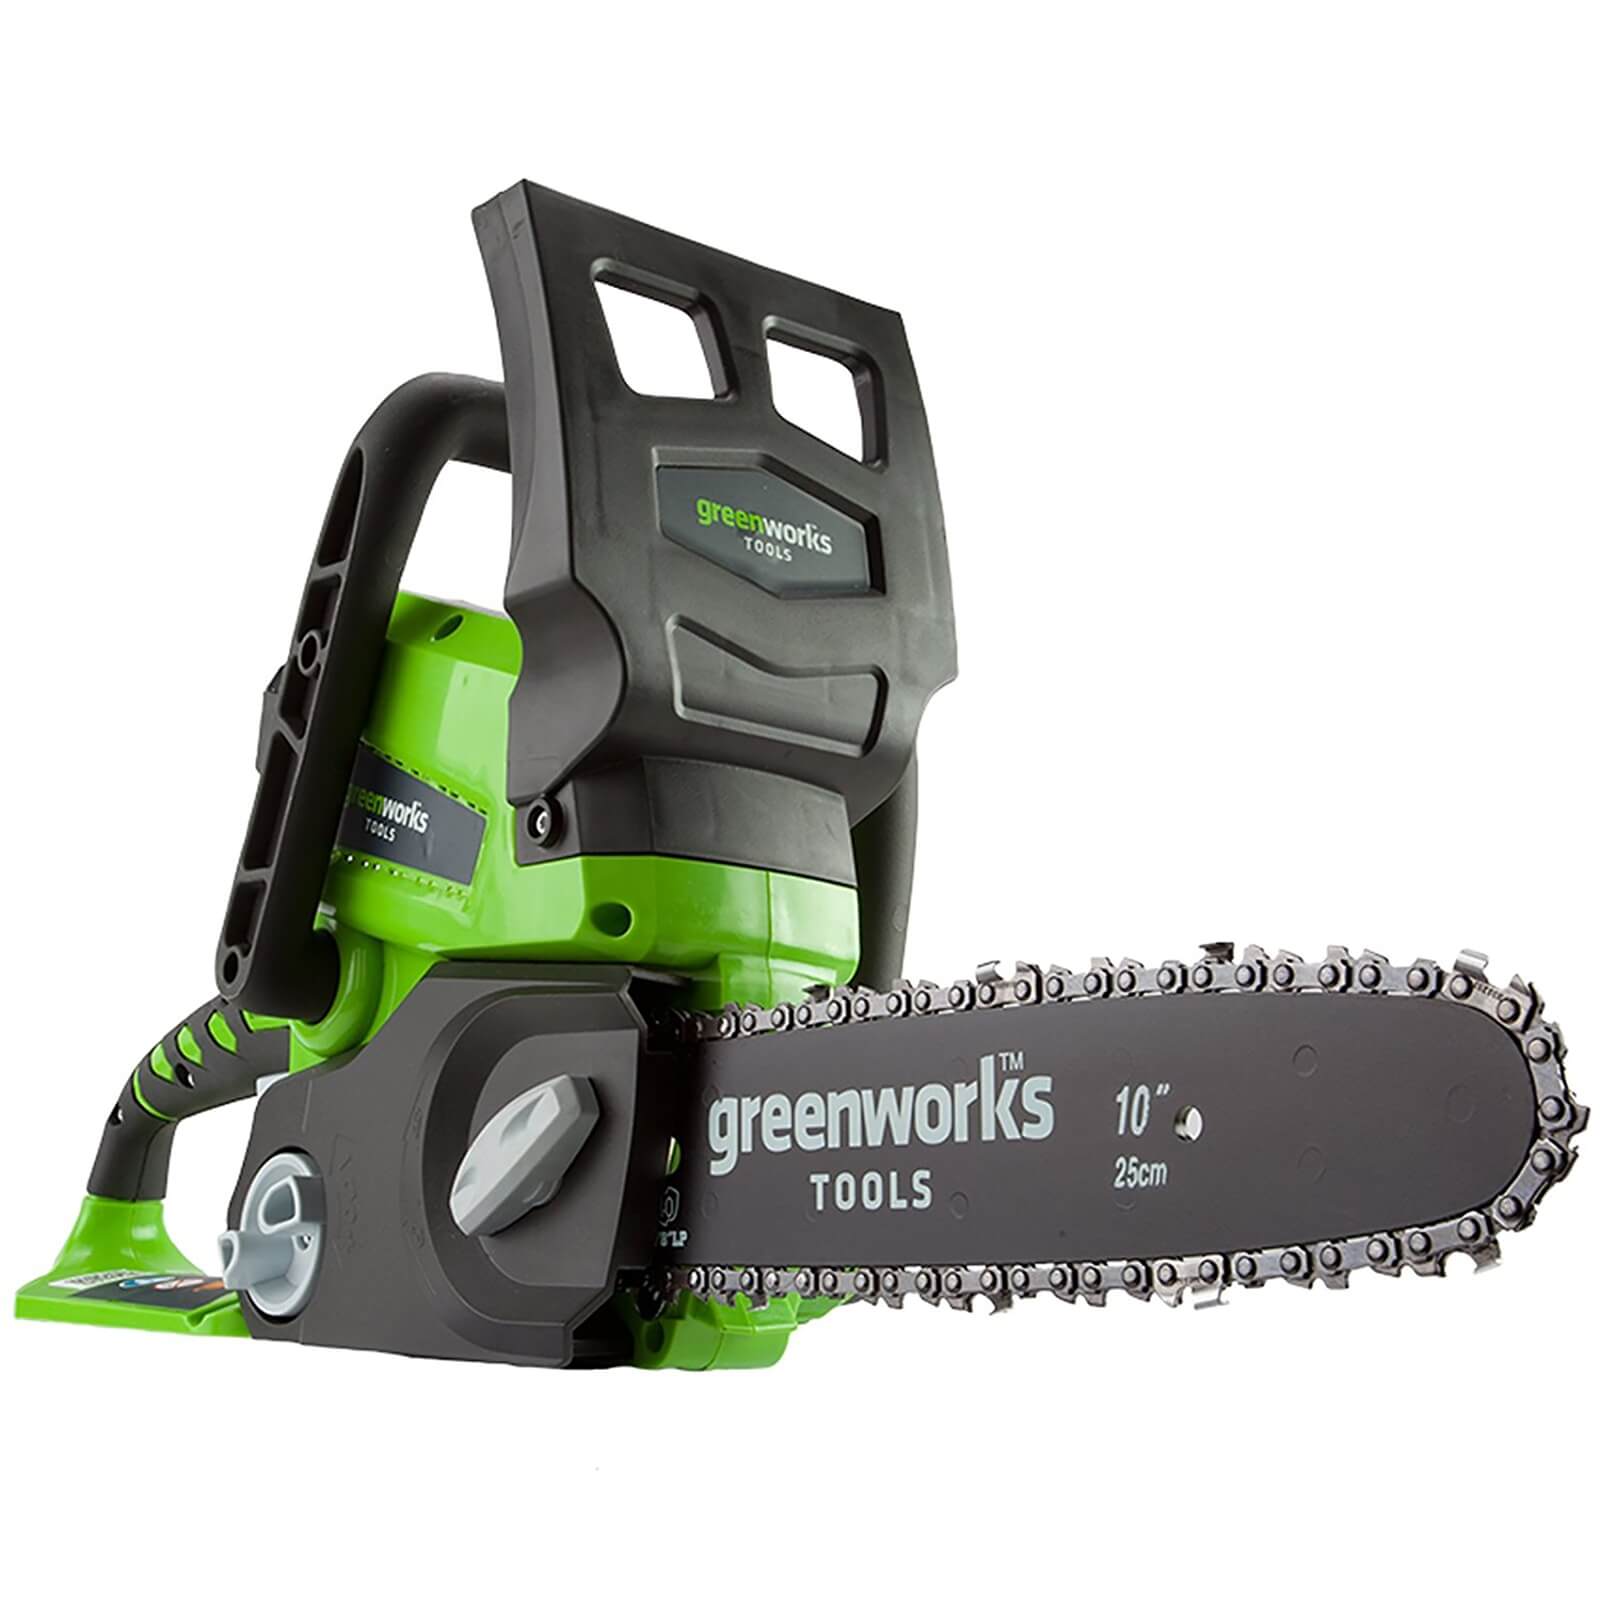 Greenworks 24V Chainsaw With 2Ah Battery Charger